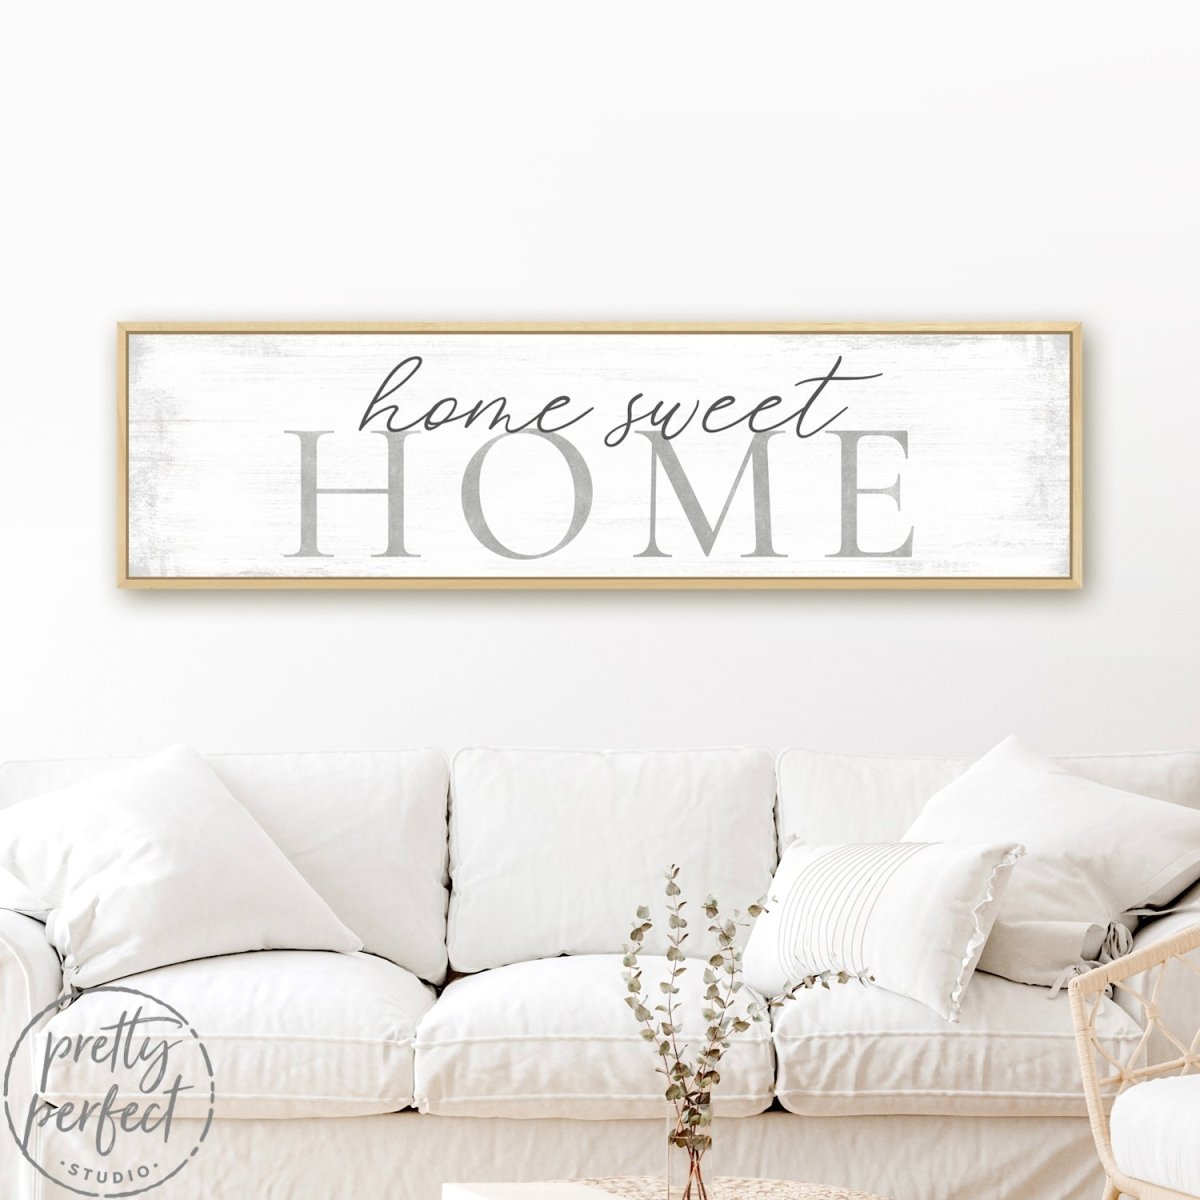 Home Sweet Home Canvas Wall Art Above Couch - Pretty Perfect Studio